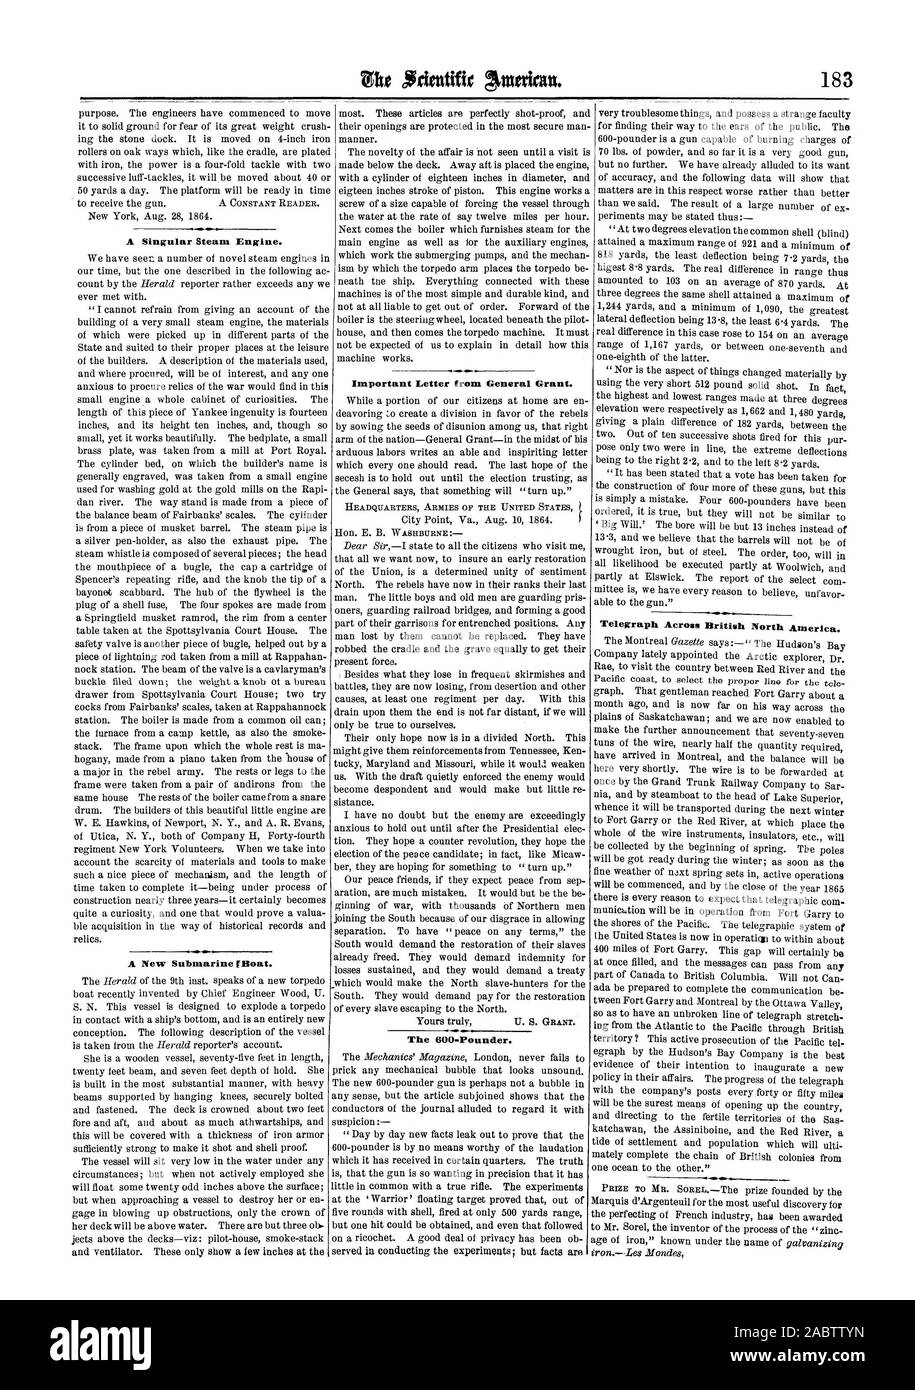 A New Submarine [Boat. Important Letter from General Grant. Telegraph Across British North America. A Singular Steam Engine., scientific american, 64-09-17 Stock Photo